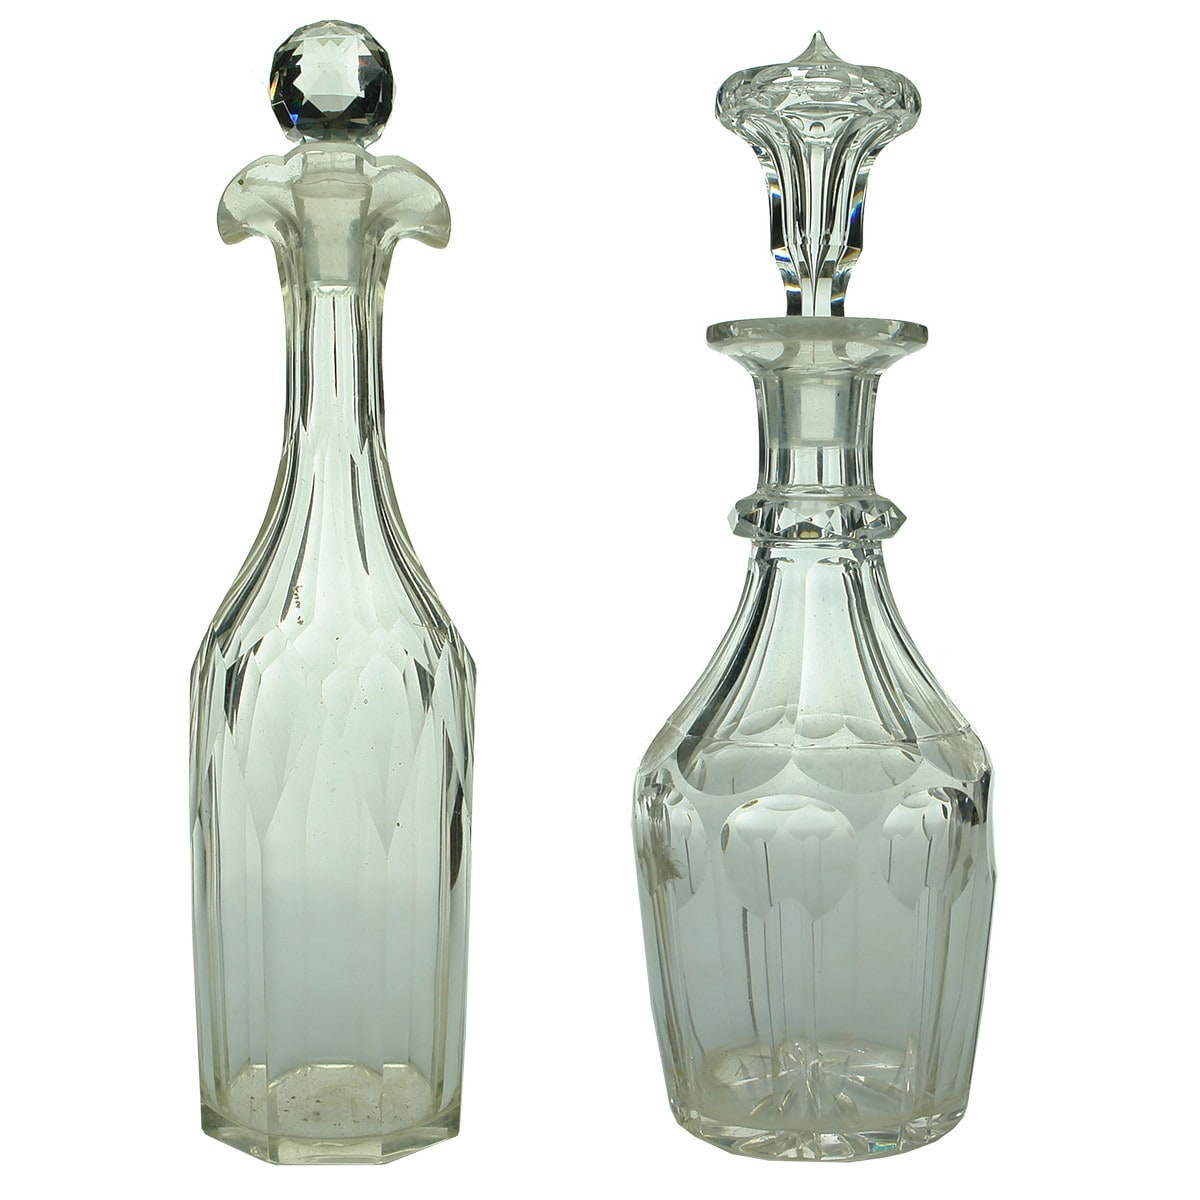 Two fancy Victorian Cut glass Crystal Decanters